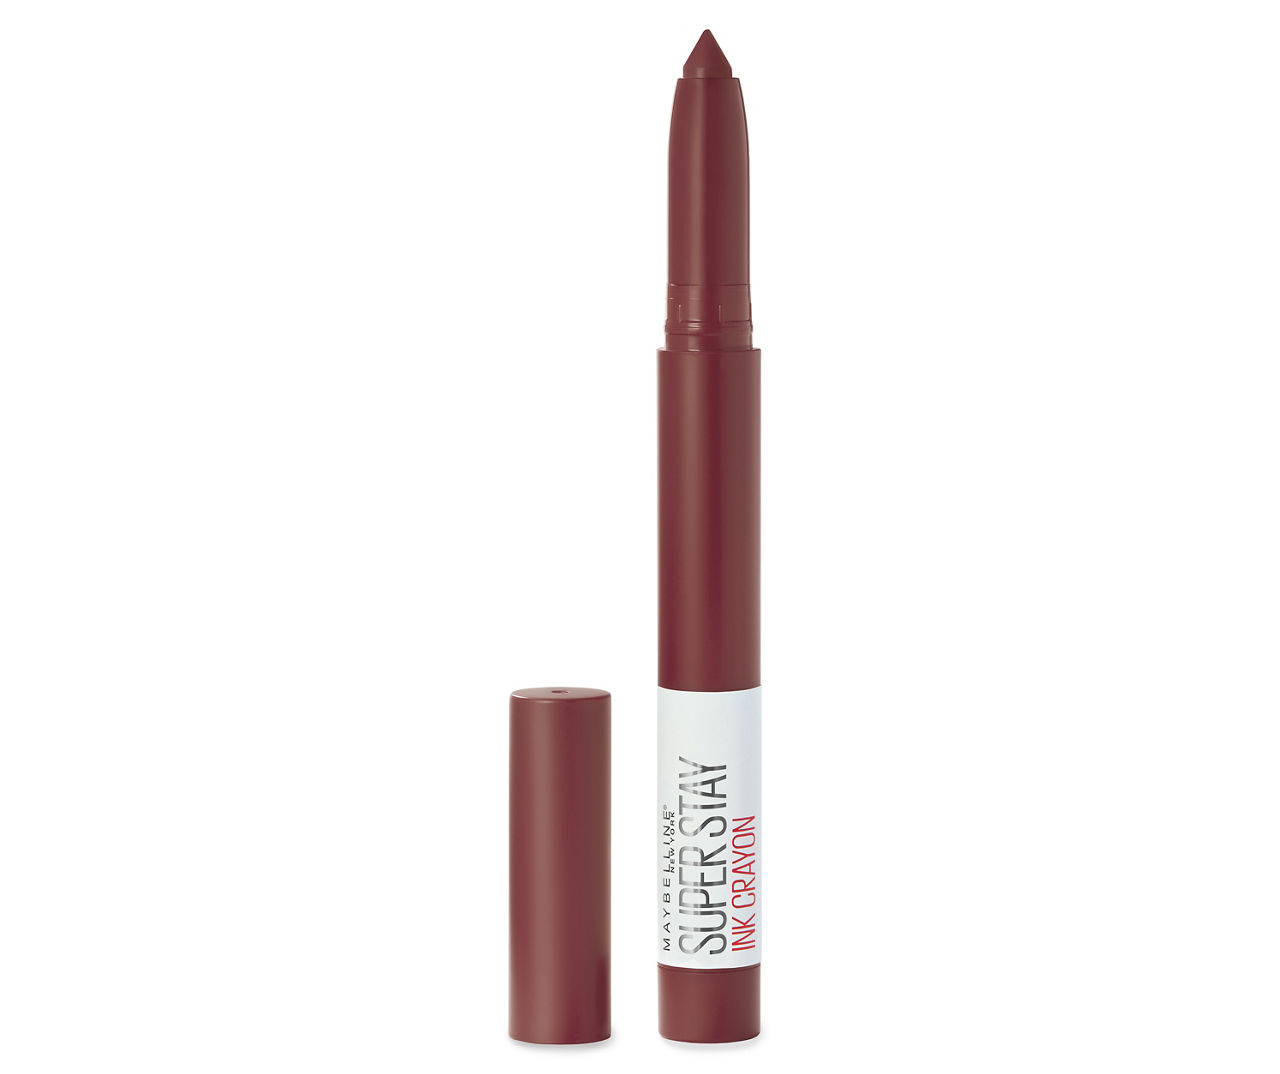 Superstay Ink Crayon Lipstick in Live on the Edge